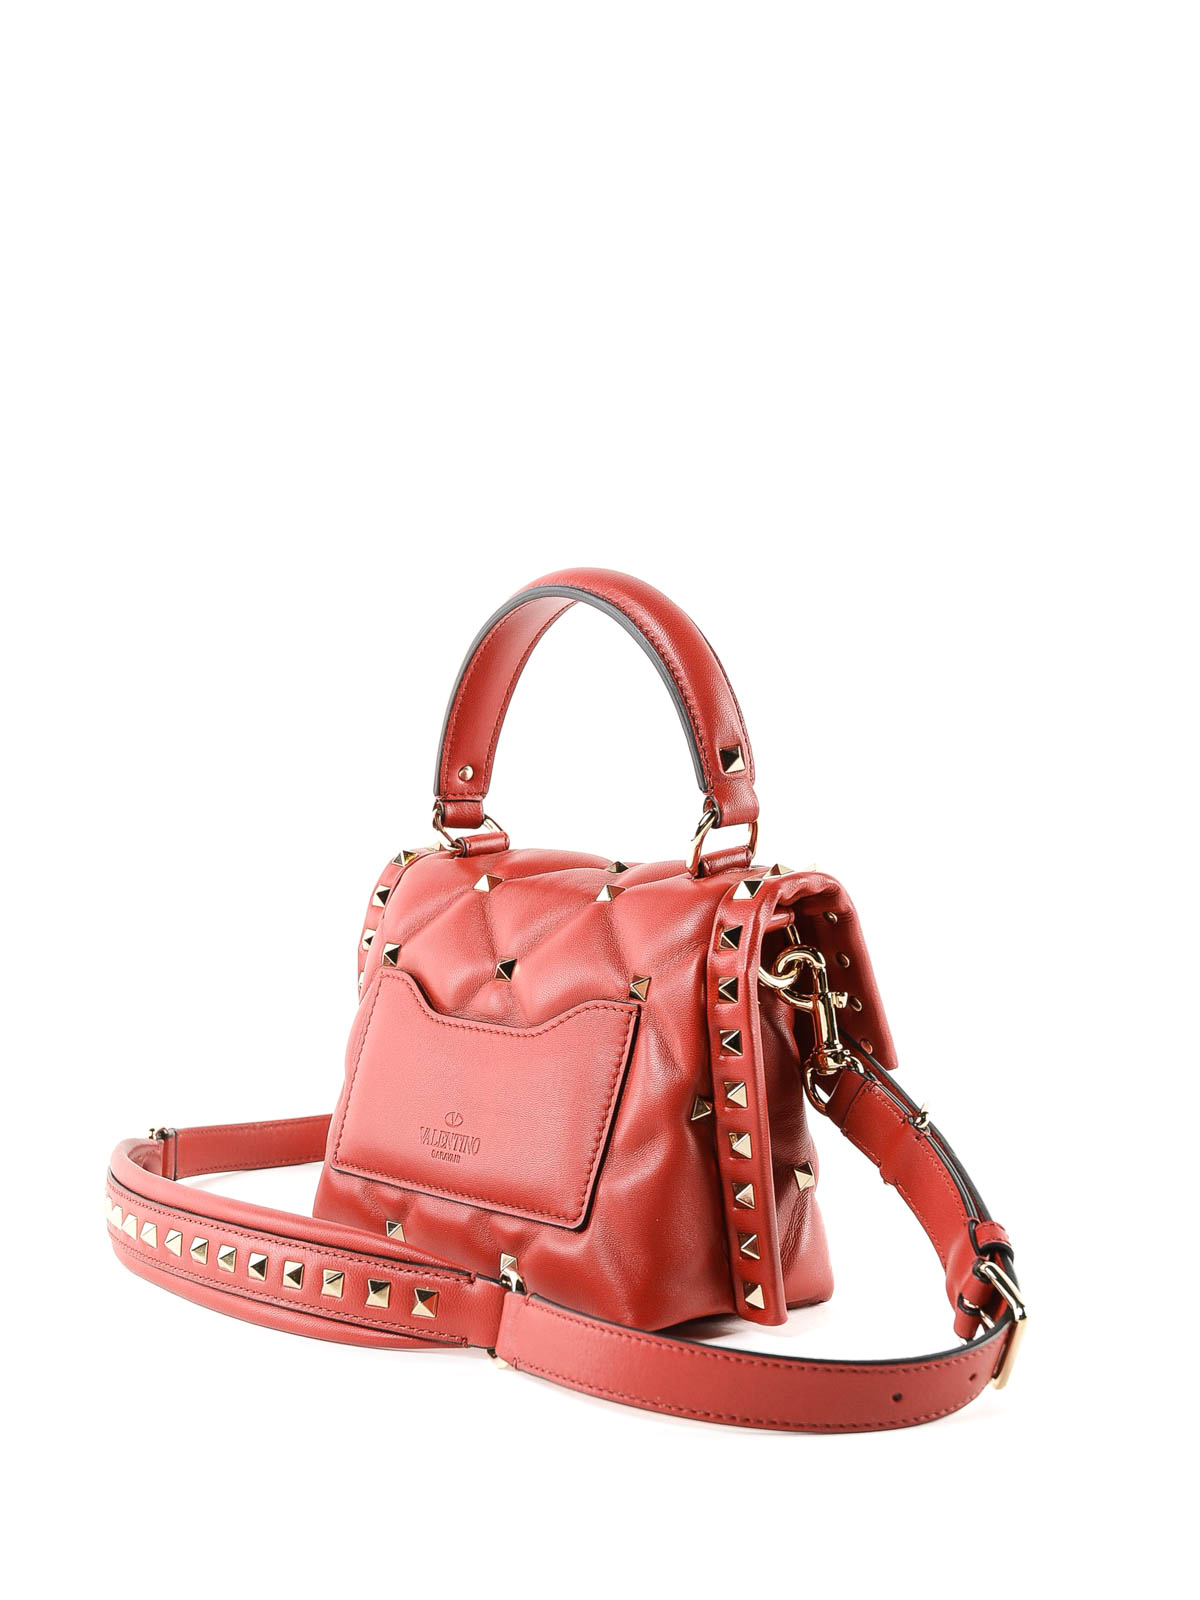 Cross body bags Valentino Garavani - Candystud red quilted leather ...